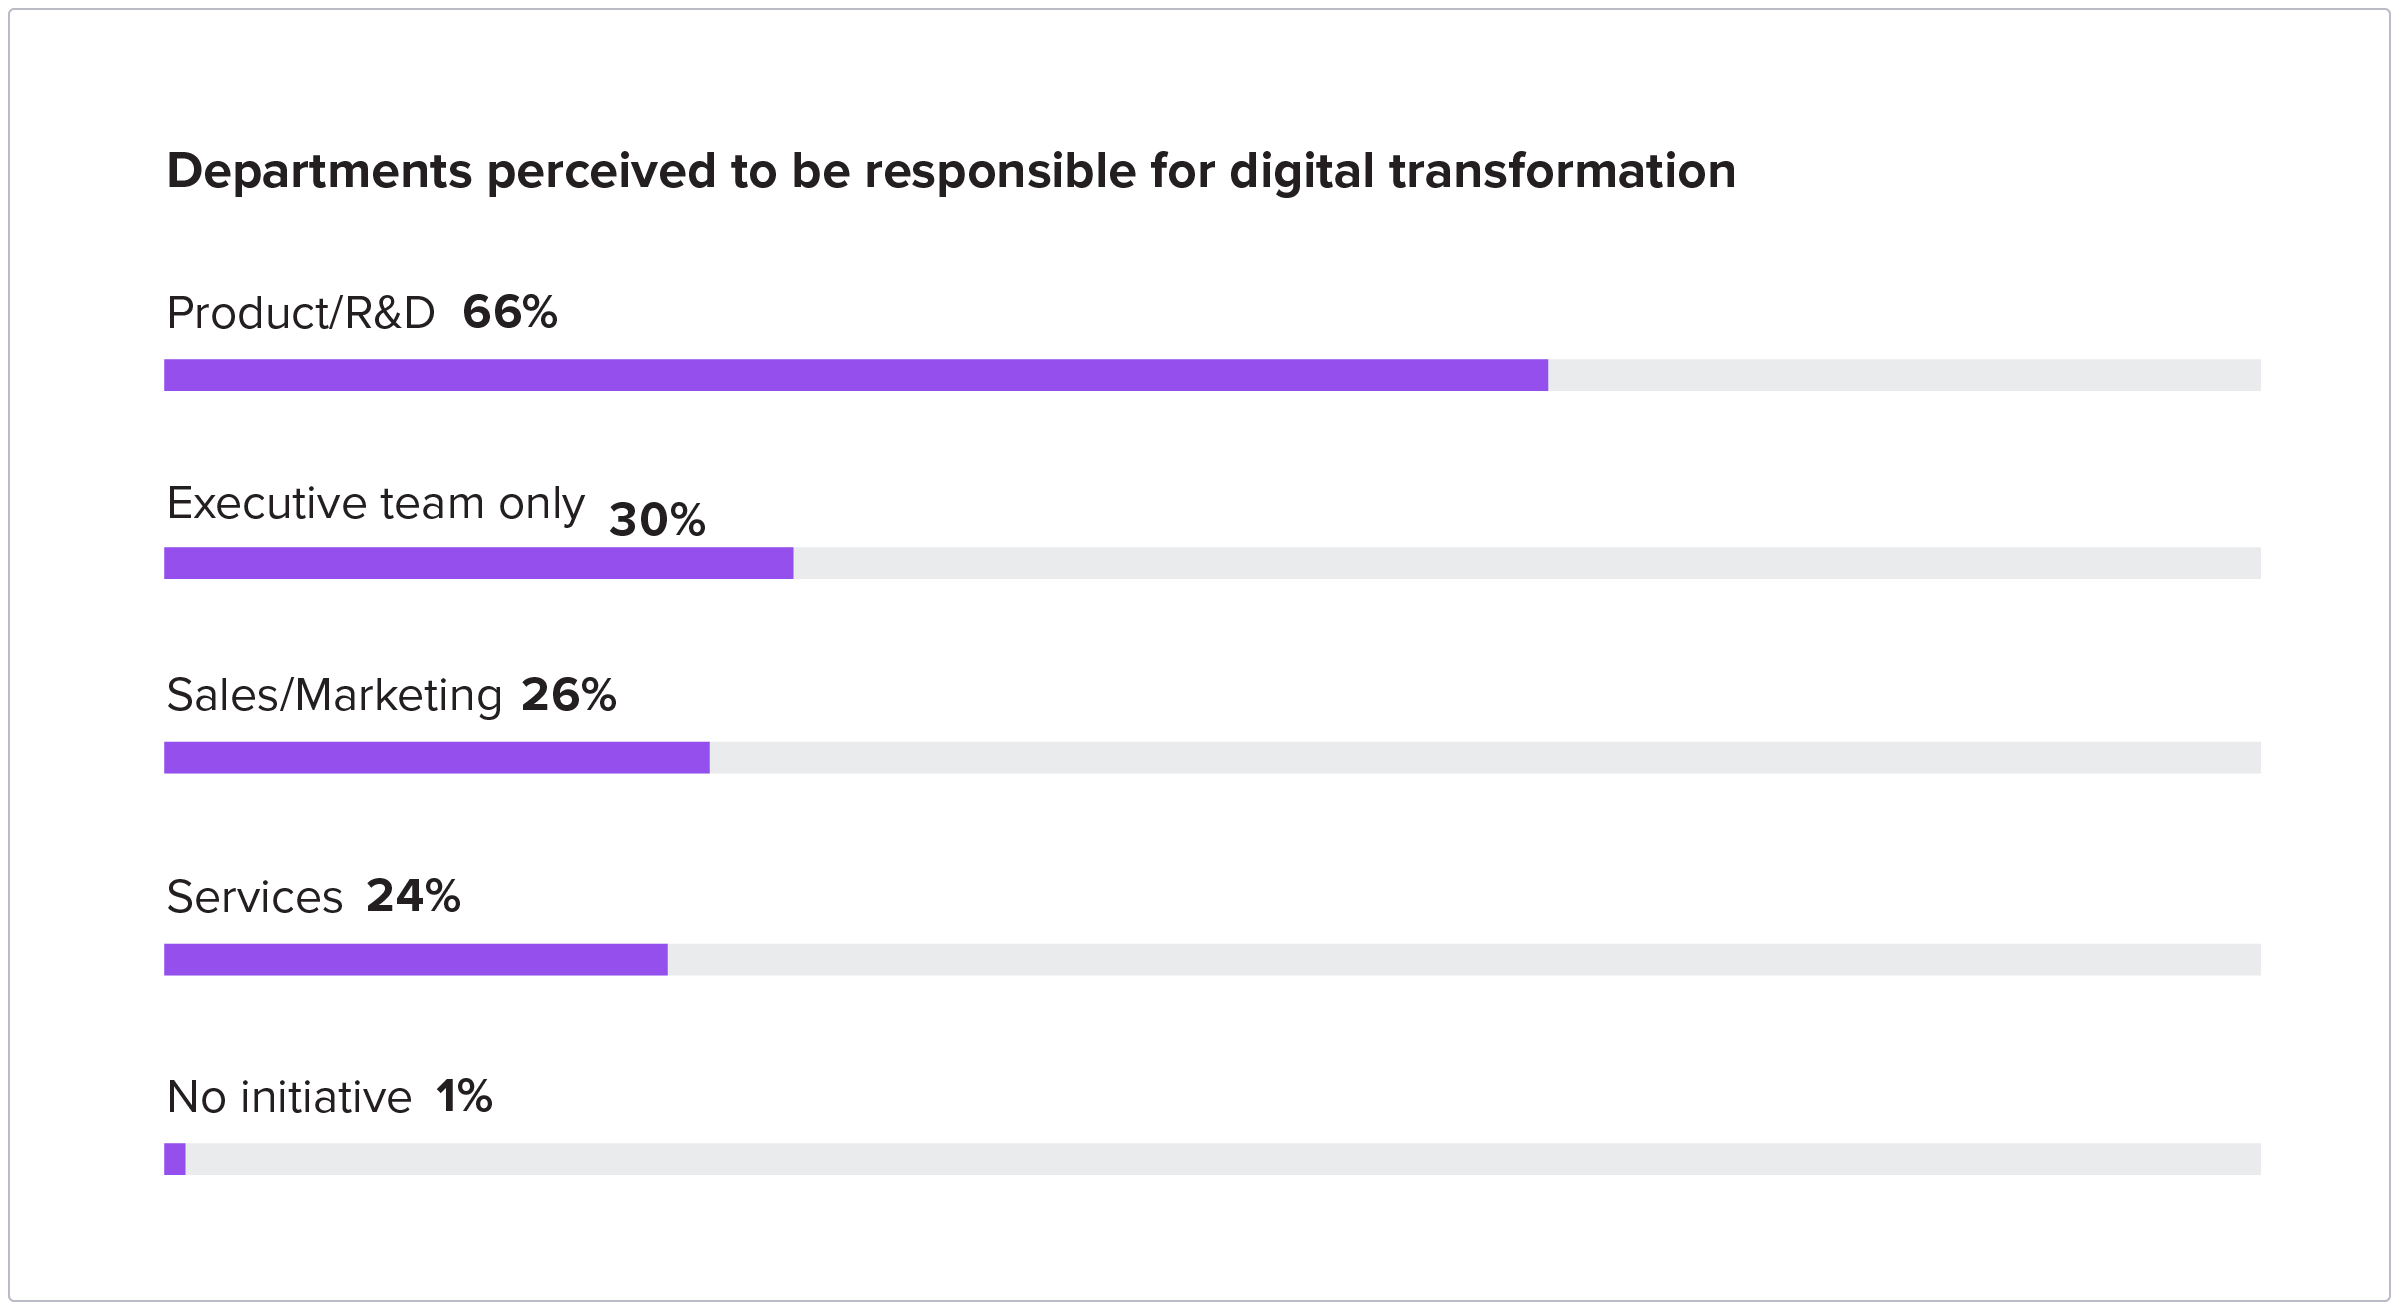 Departments perceived to be responsible for digital transformation